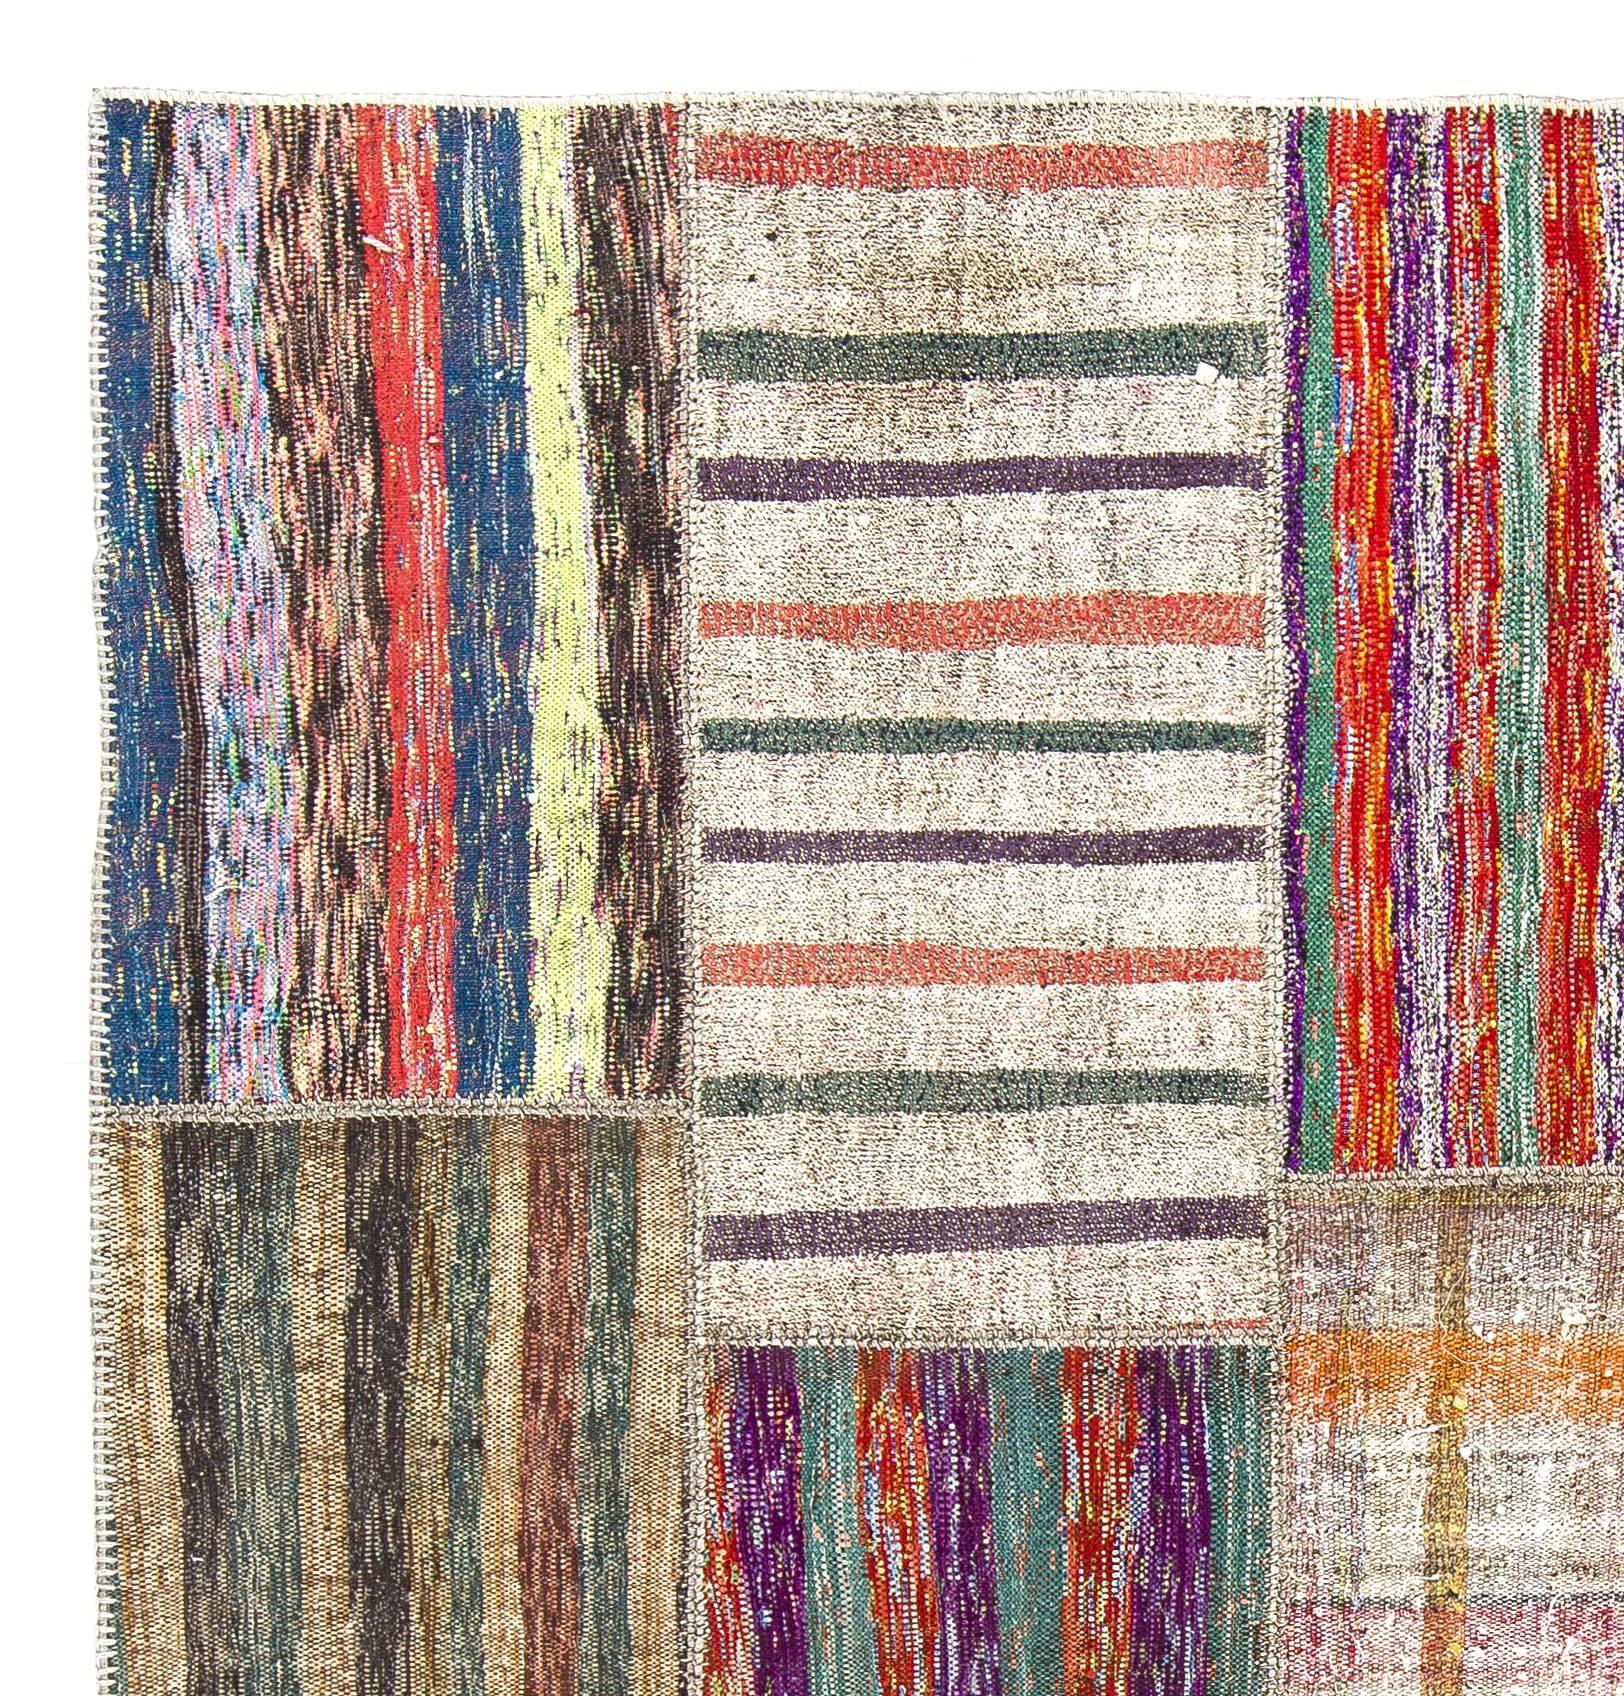 These authentic flat-weaves (Kilims) from Eastern Turkey were handwoven by Nomads around mid-20th century to be used as floor coverings in their tents and winter homes. They were made to use for everyday life rather than re-sale and export purposes